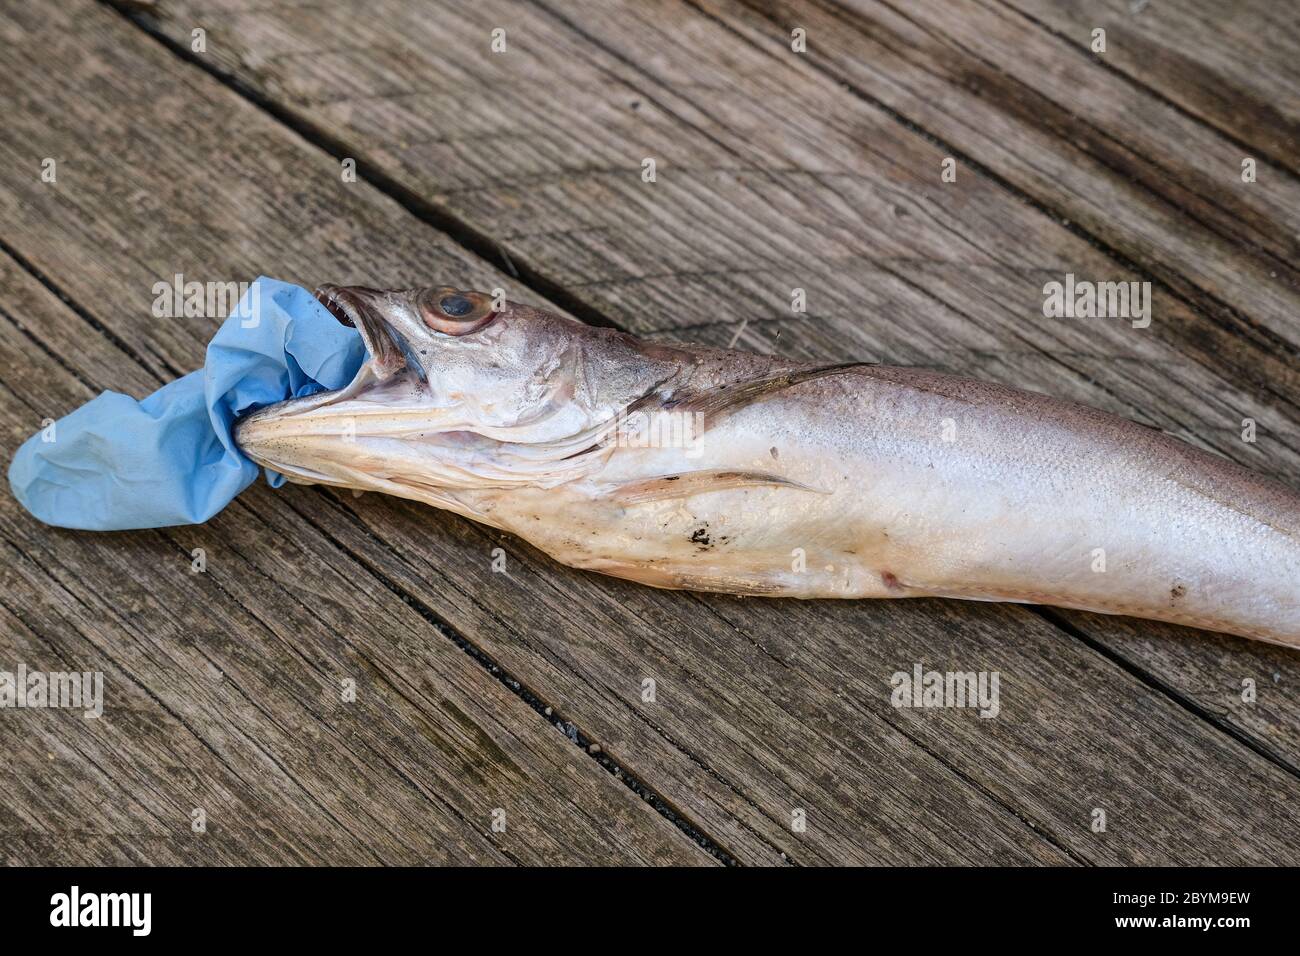 Isolated Cod fish dead eating plastic disposal medical glove garbage waste,animal ecosystem pollution after covid disease Stock Photo